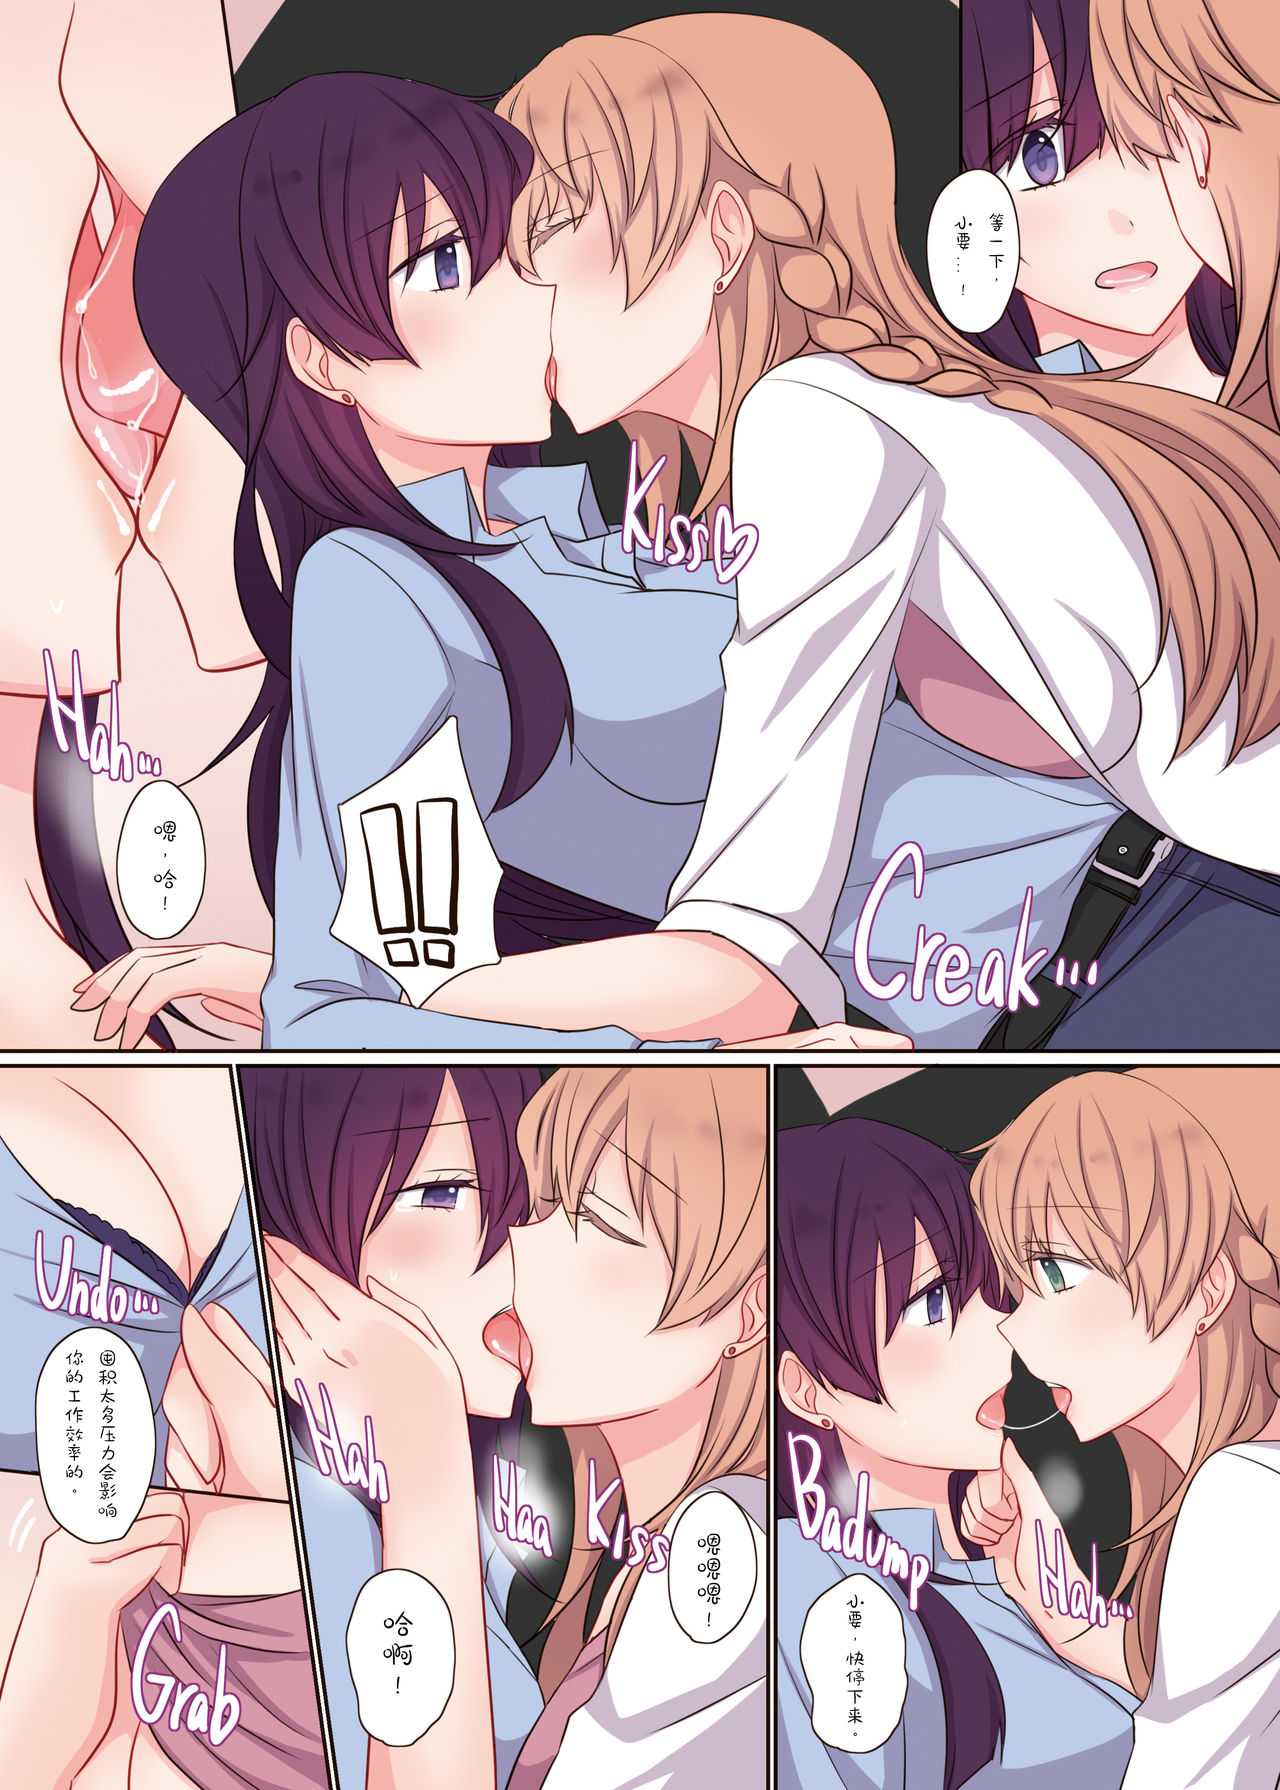 [434 Not Found (isya)] Office Sweet 365 -APPEND- [Chinese] [WTM直接汉化&v.v.t.m汉化组] [Digital] page 5 full